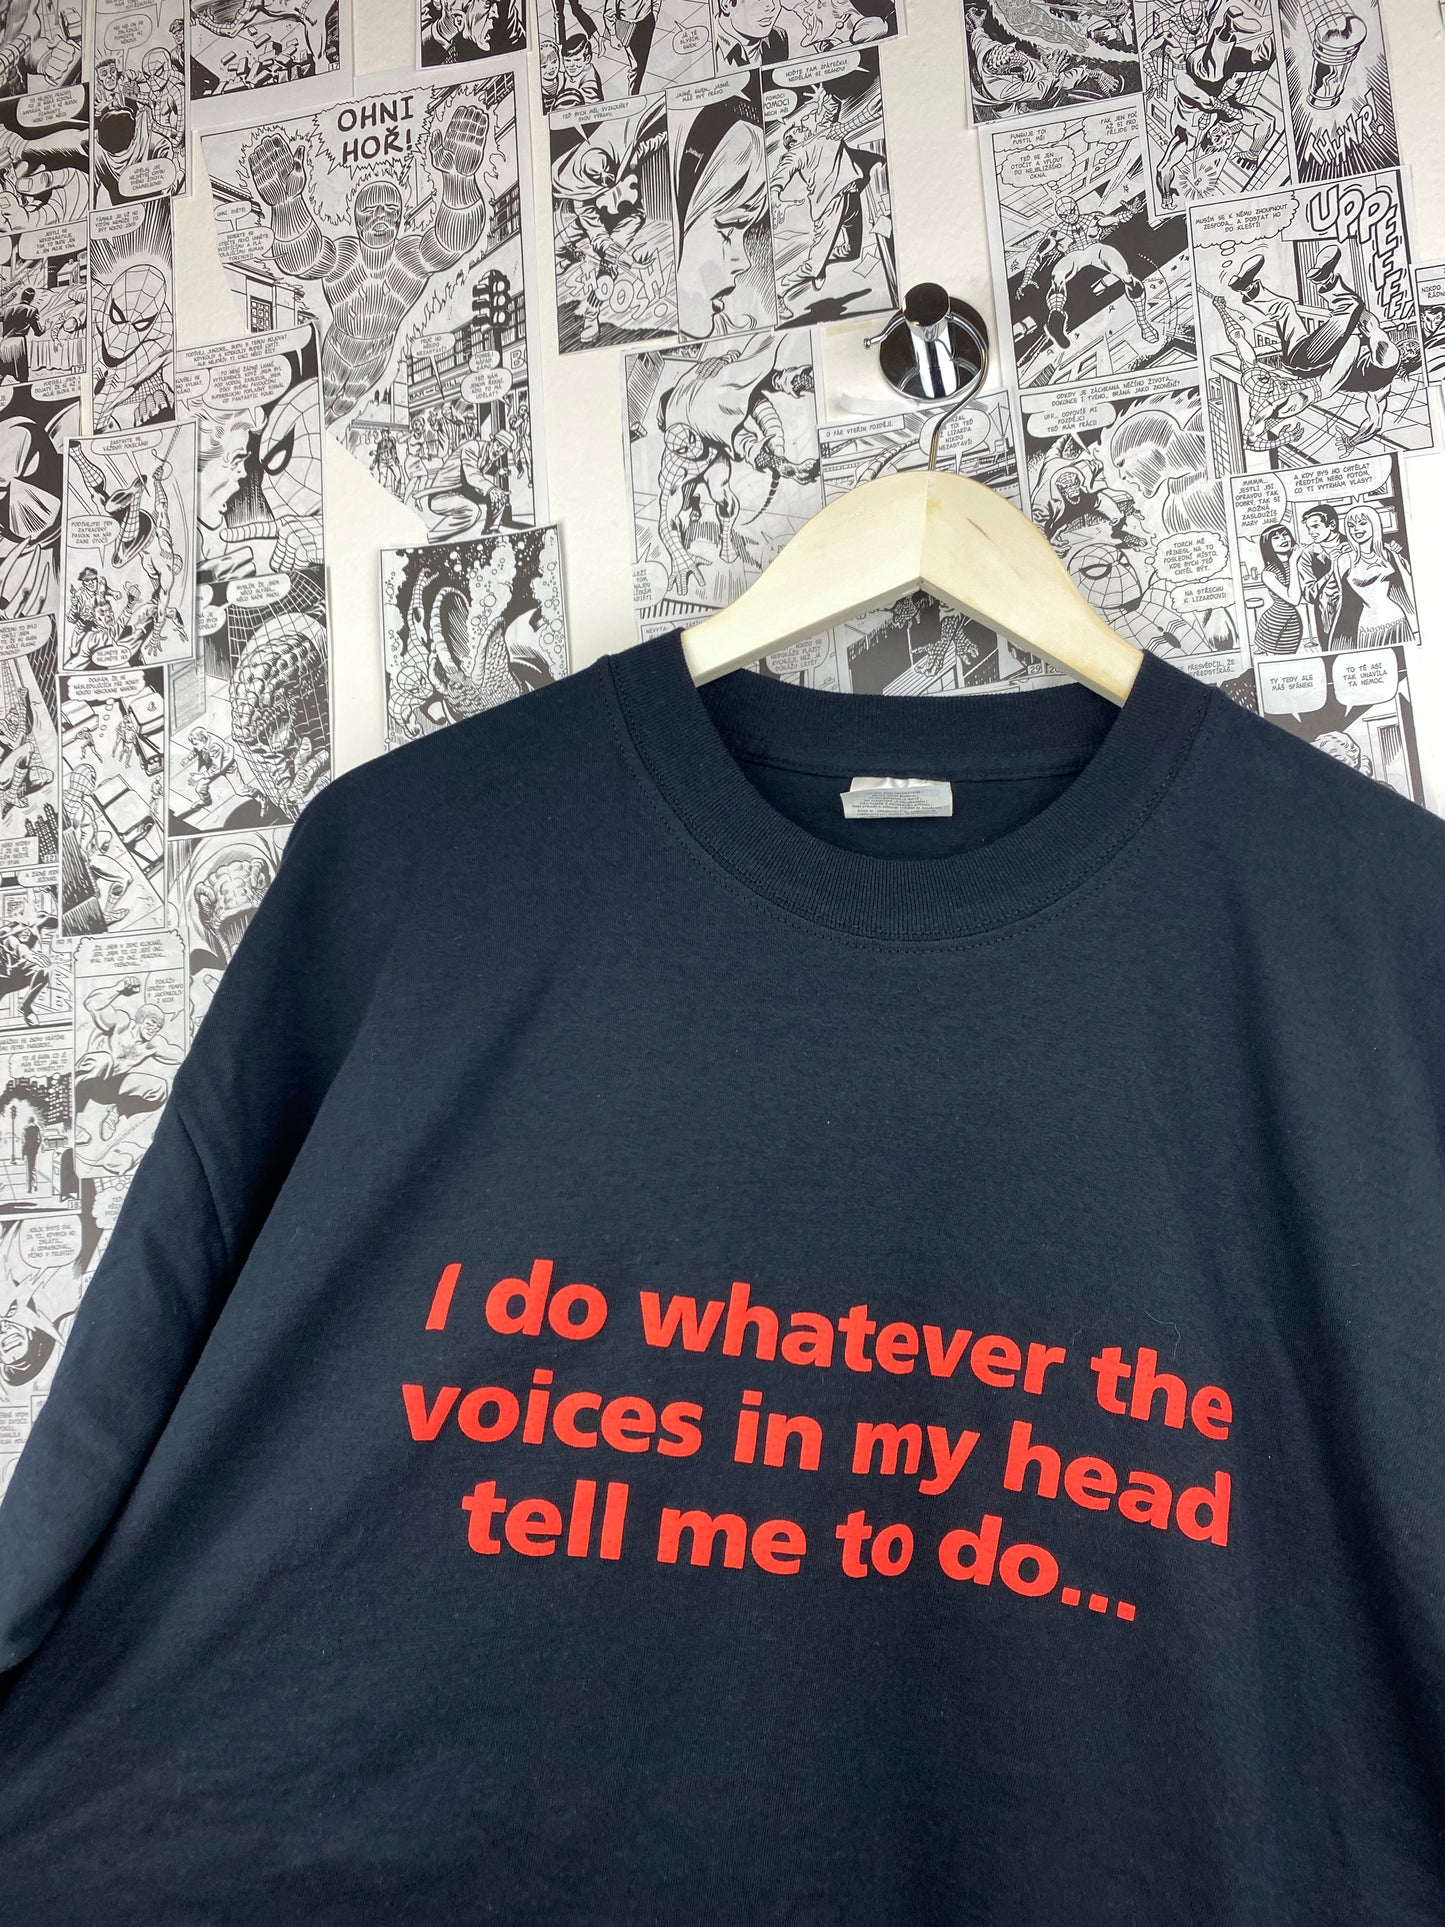 Vintage “Voices in my head” Quote t-shirt - size XL